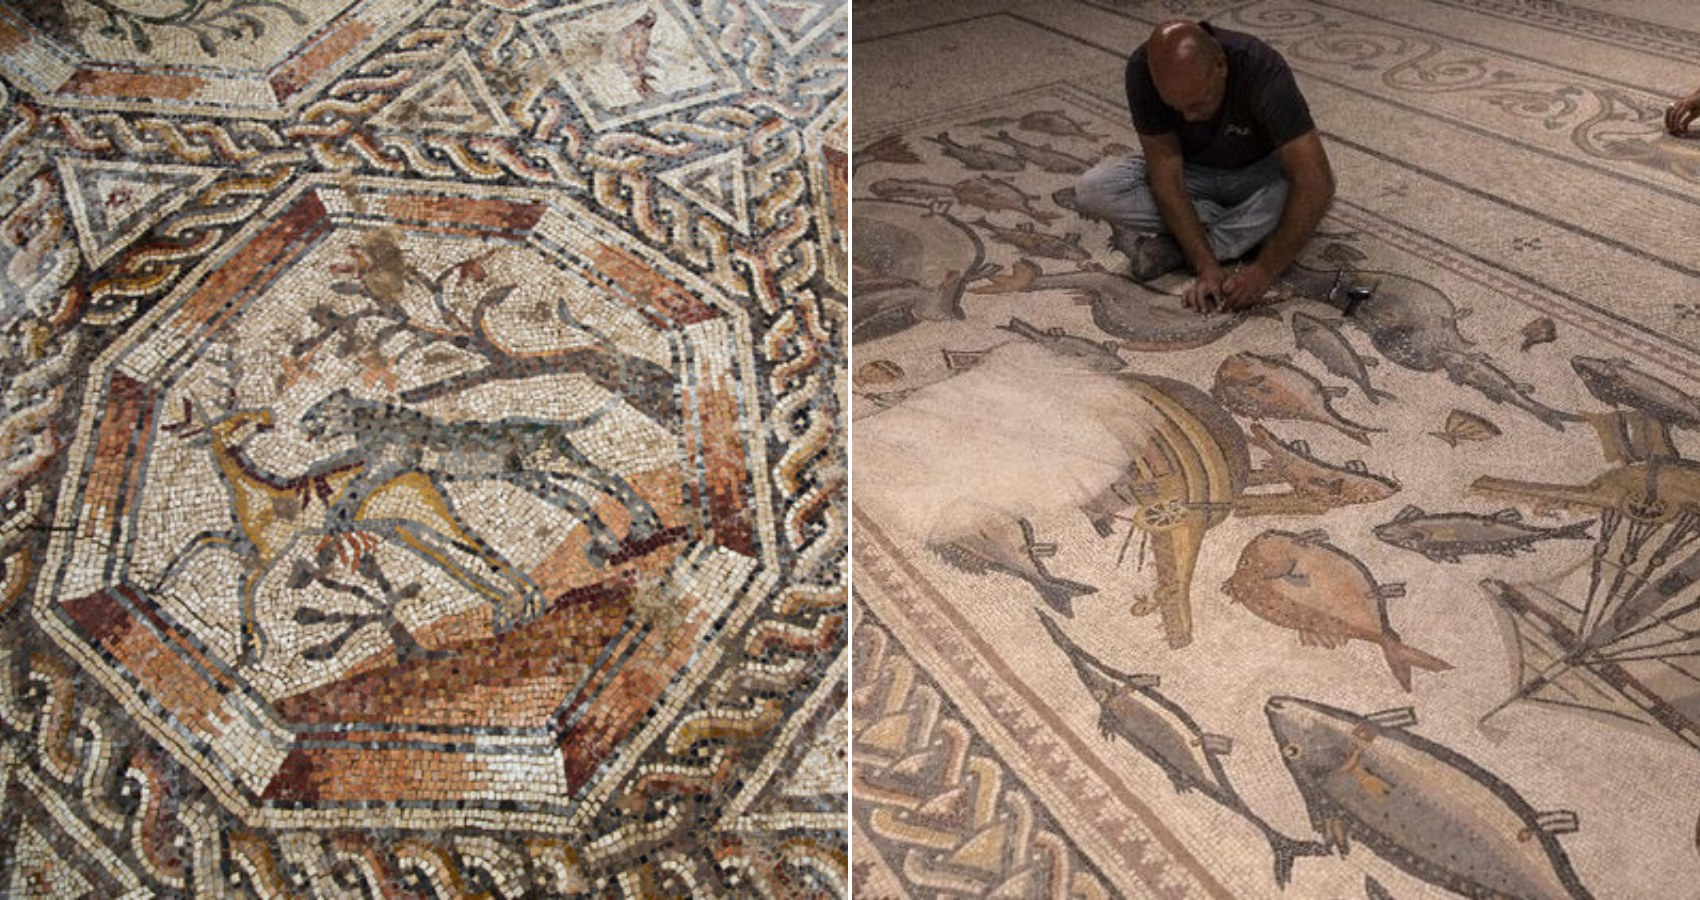 Roman-era mosaic back in Israel as centrepiece of new museum